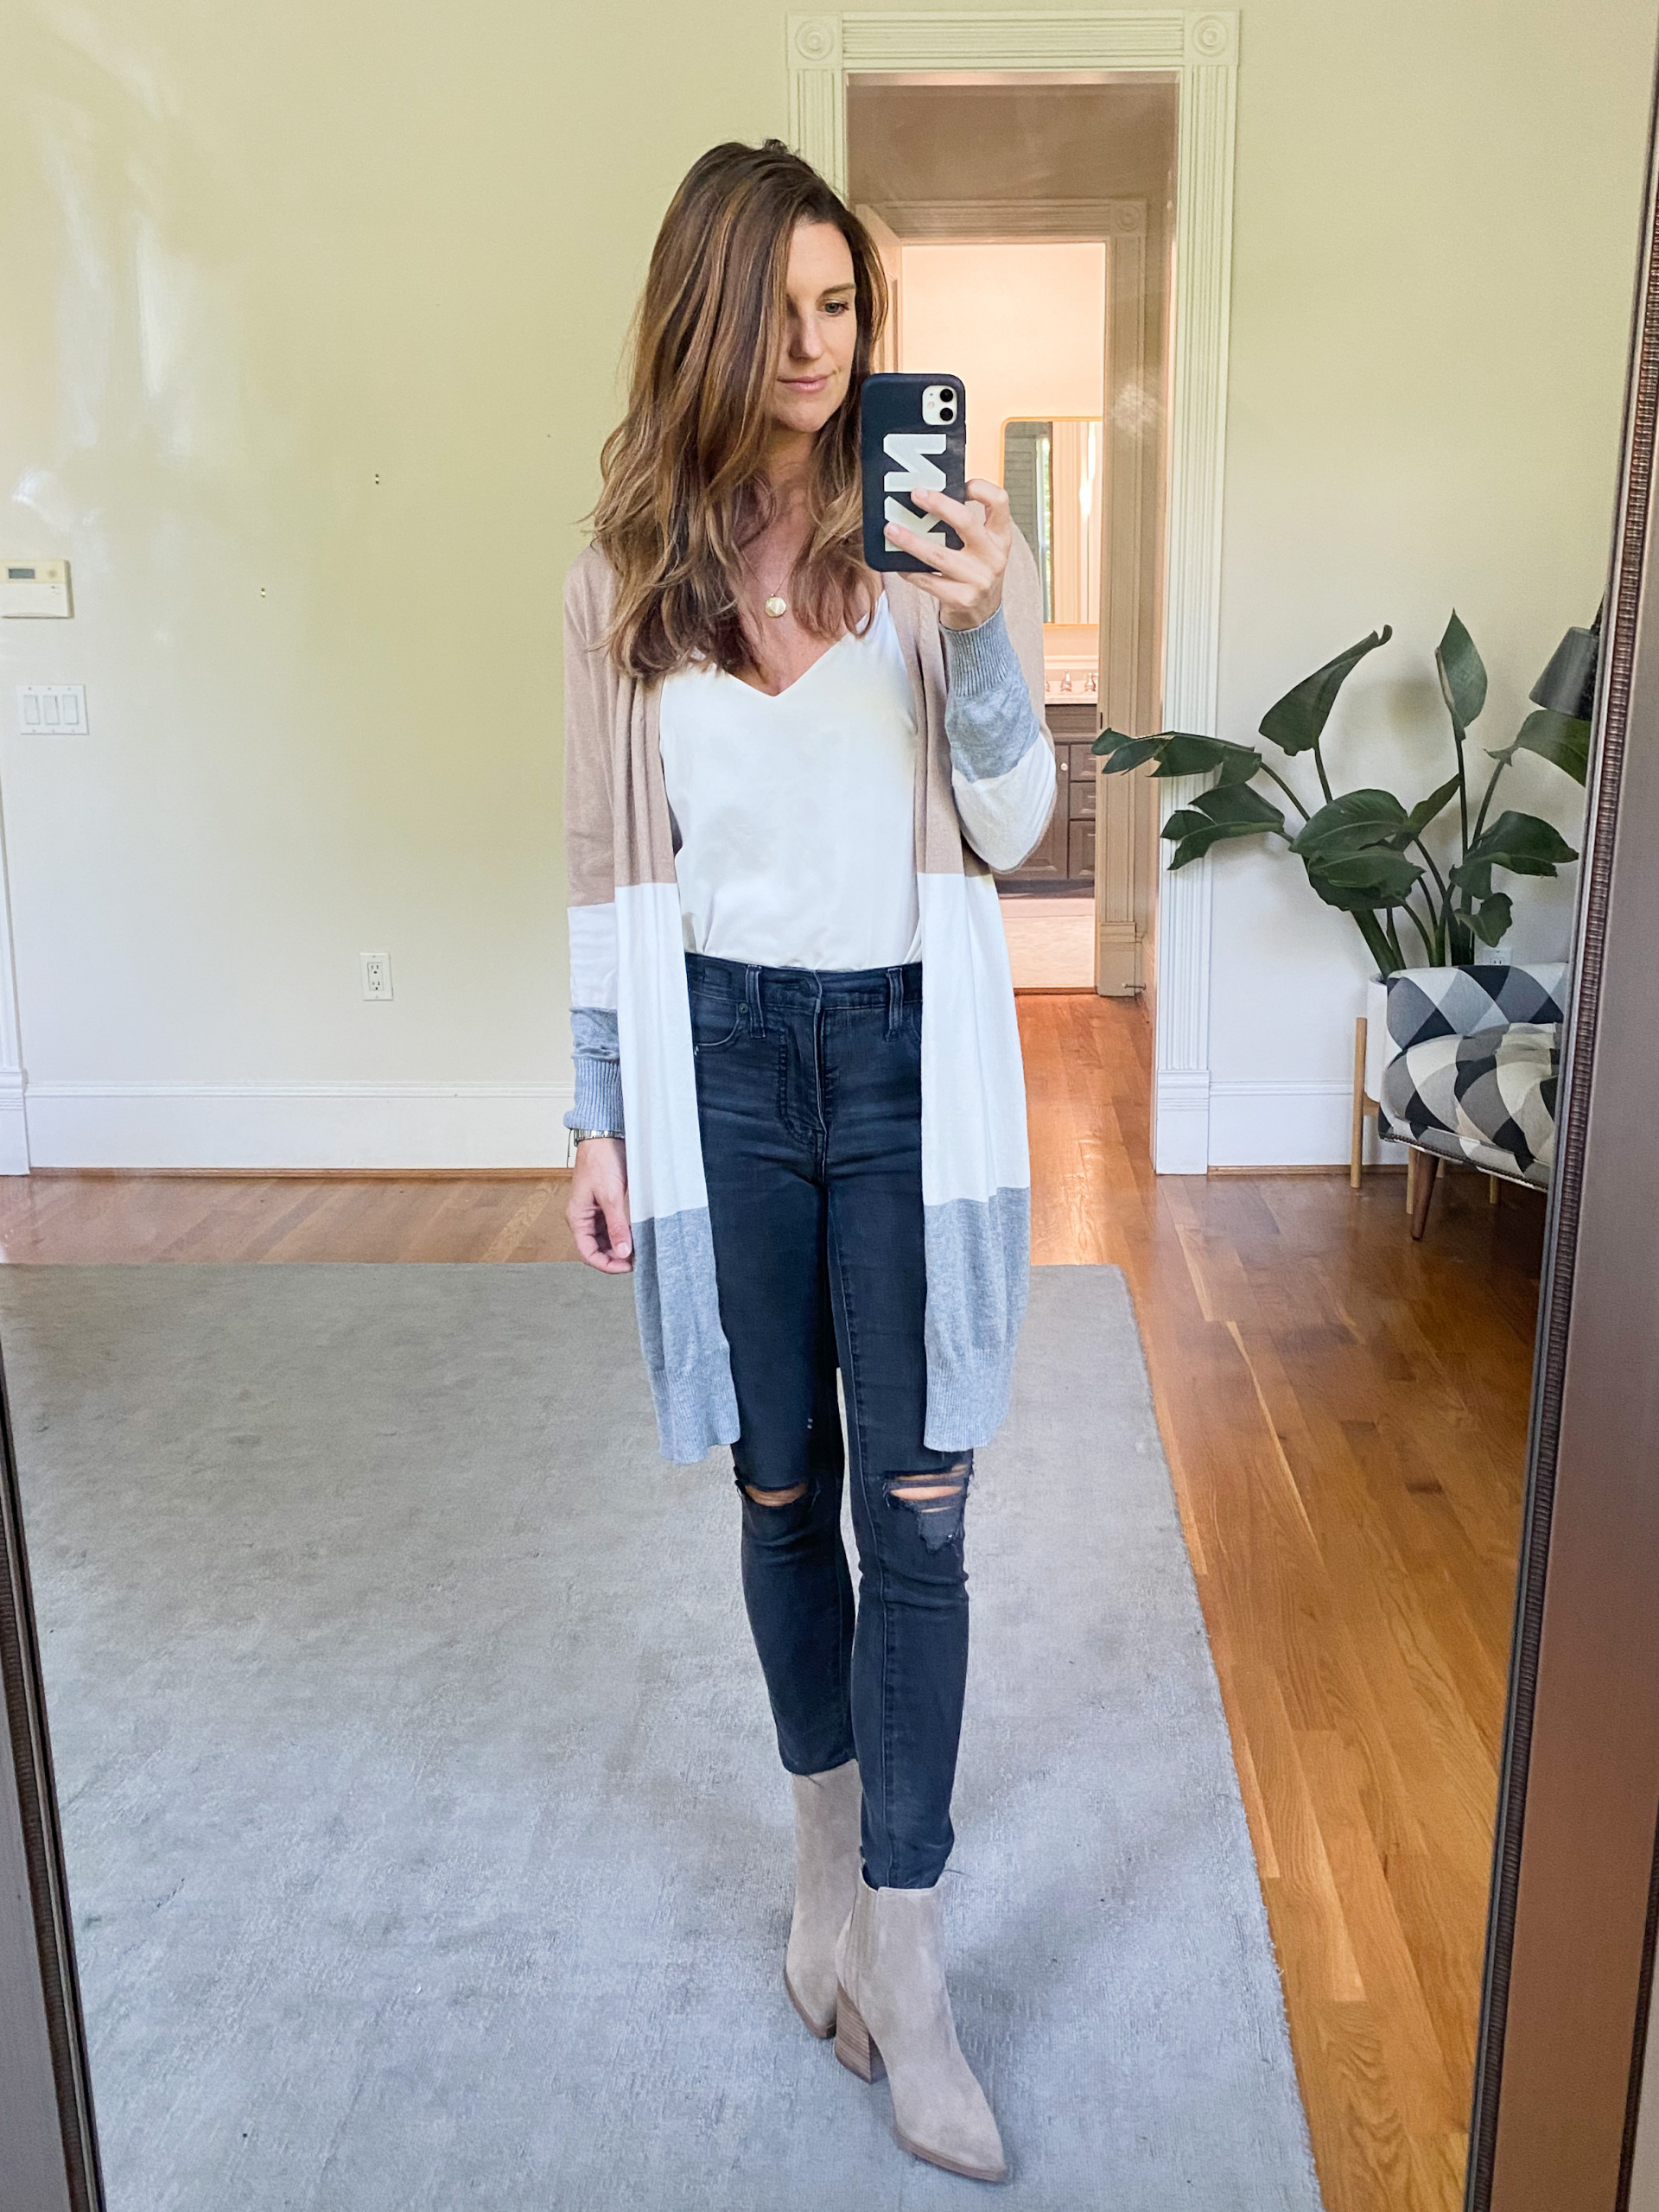 End of summer looks, lightweight cardigans for fall, transition looks, fall style over 40, finding beauty mom outfit ideas 